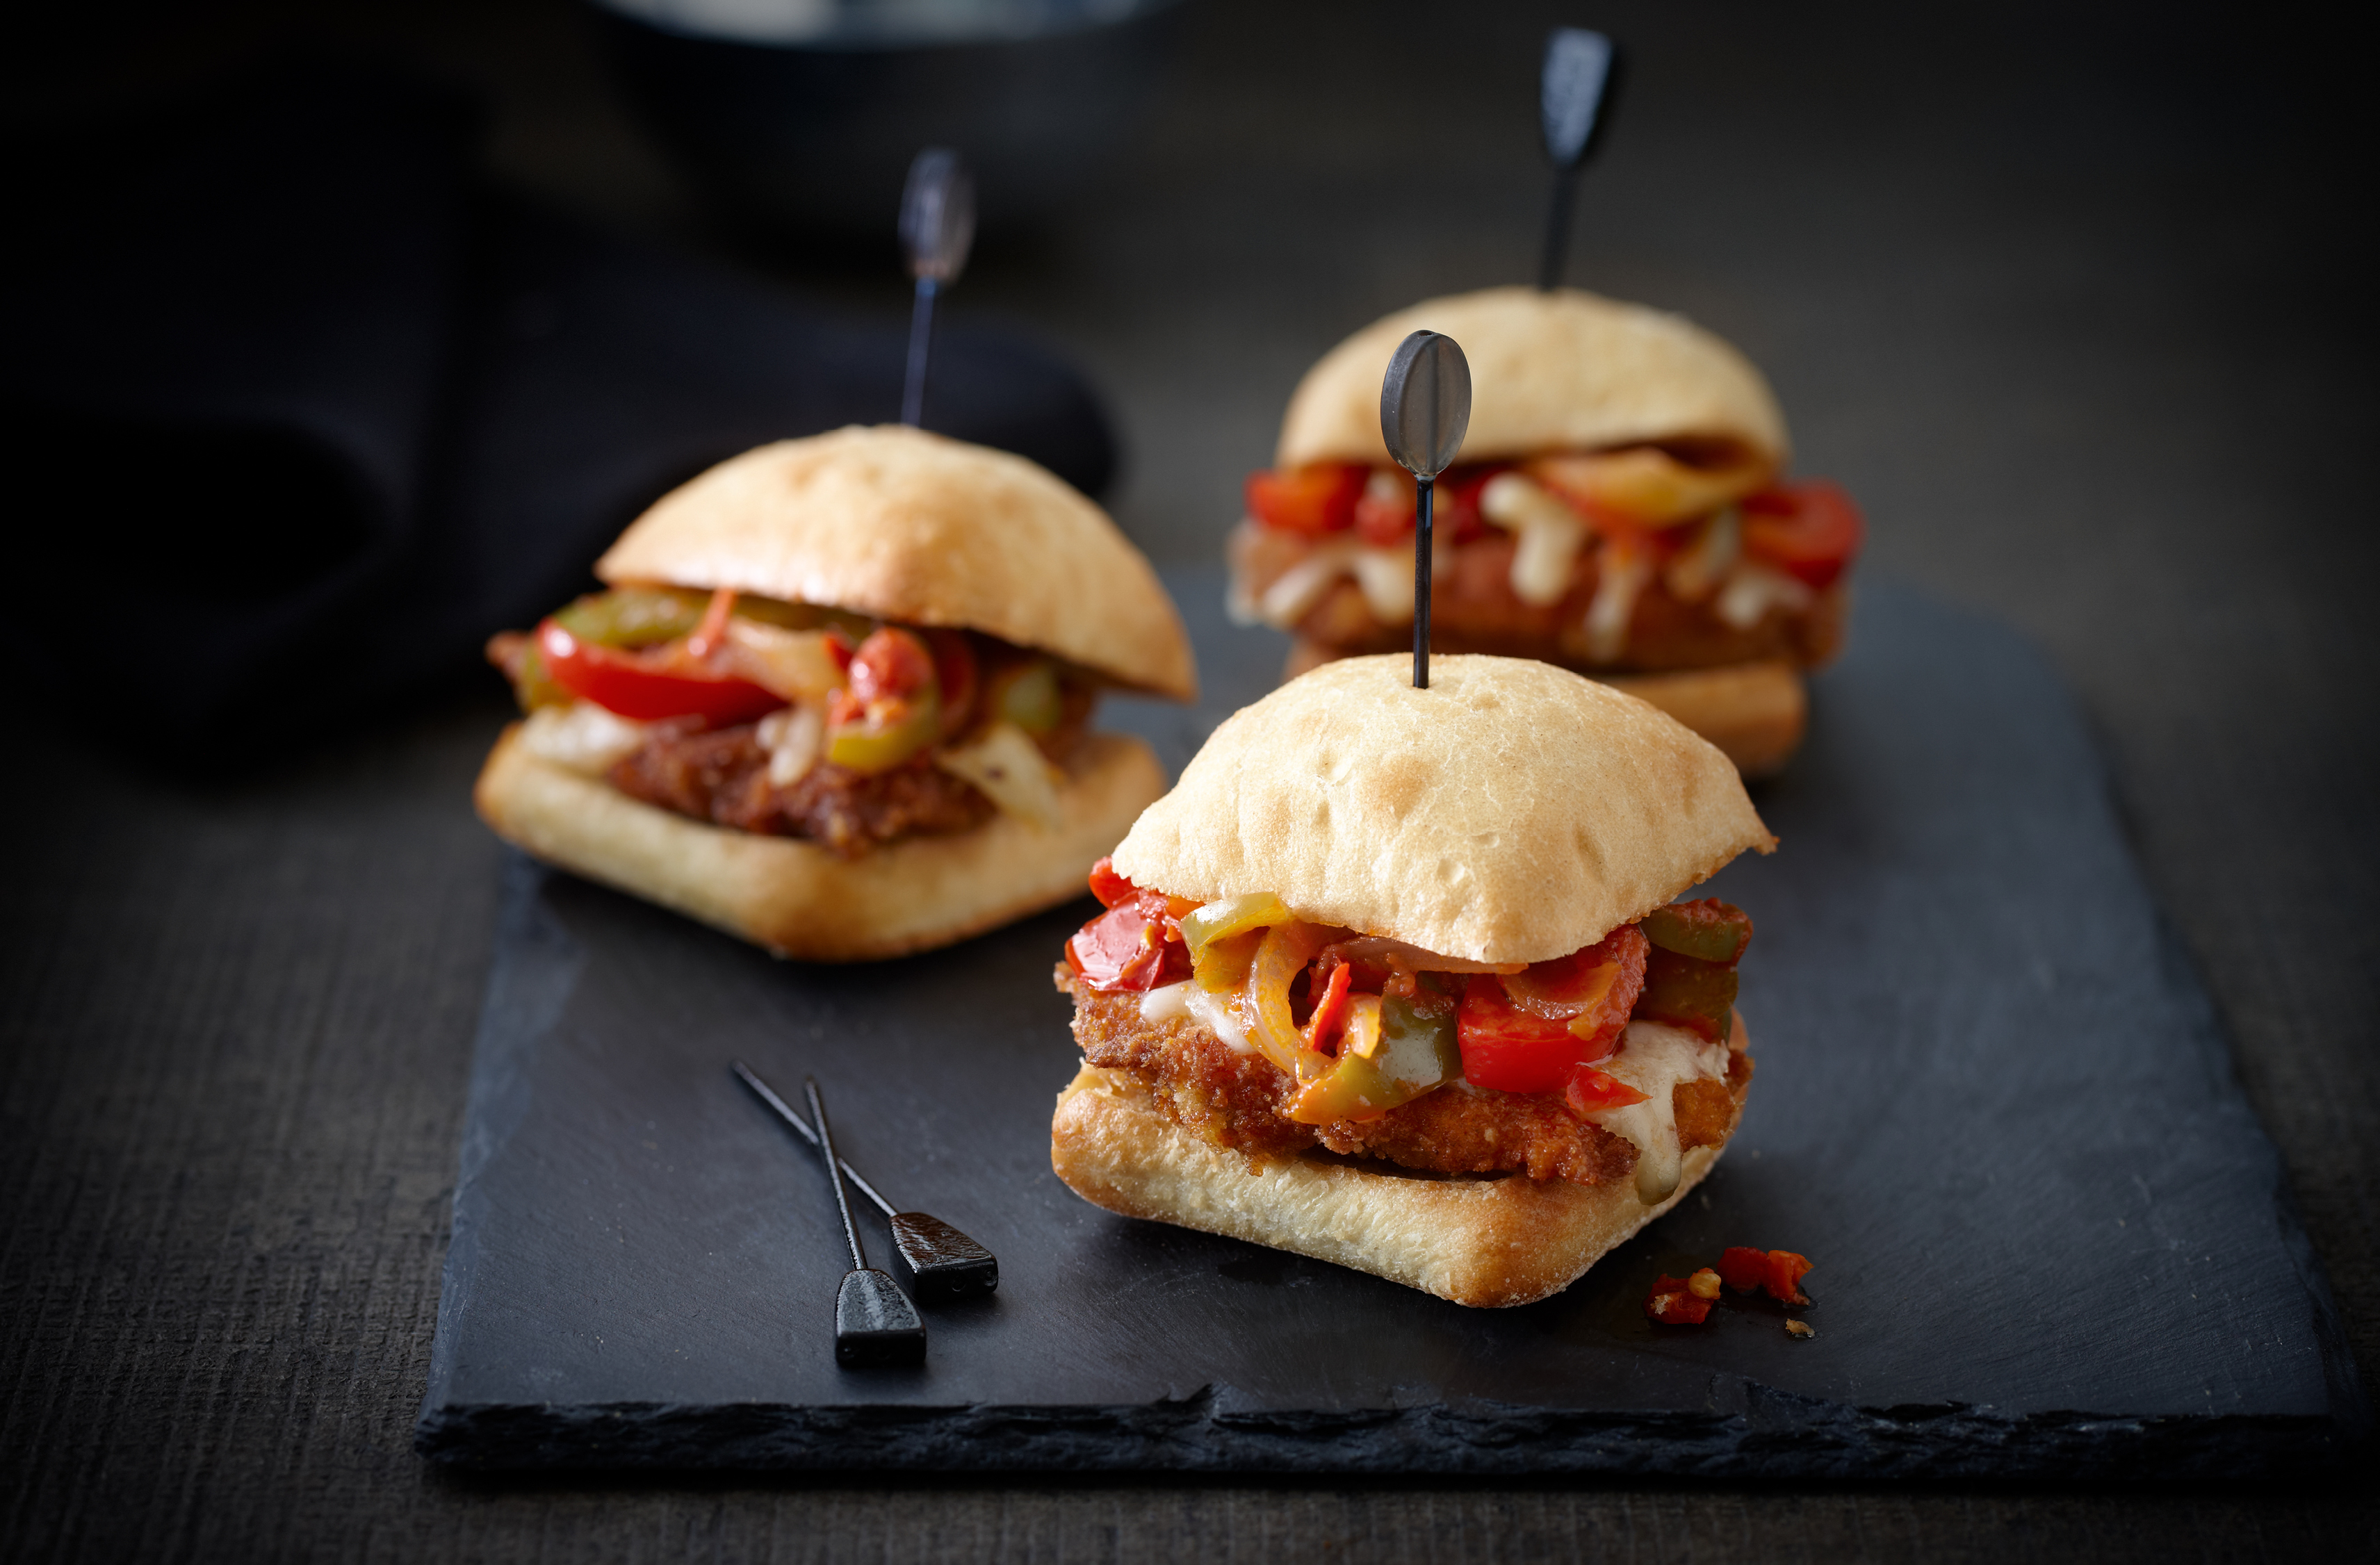 3 breaded veal sliders on ciabatta buns with tomato sauce, peppers & cheese